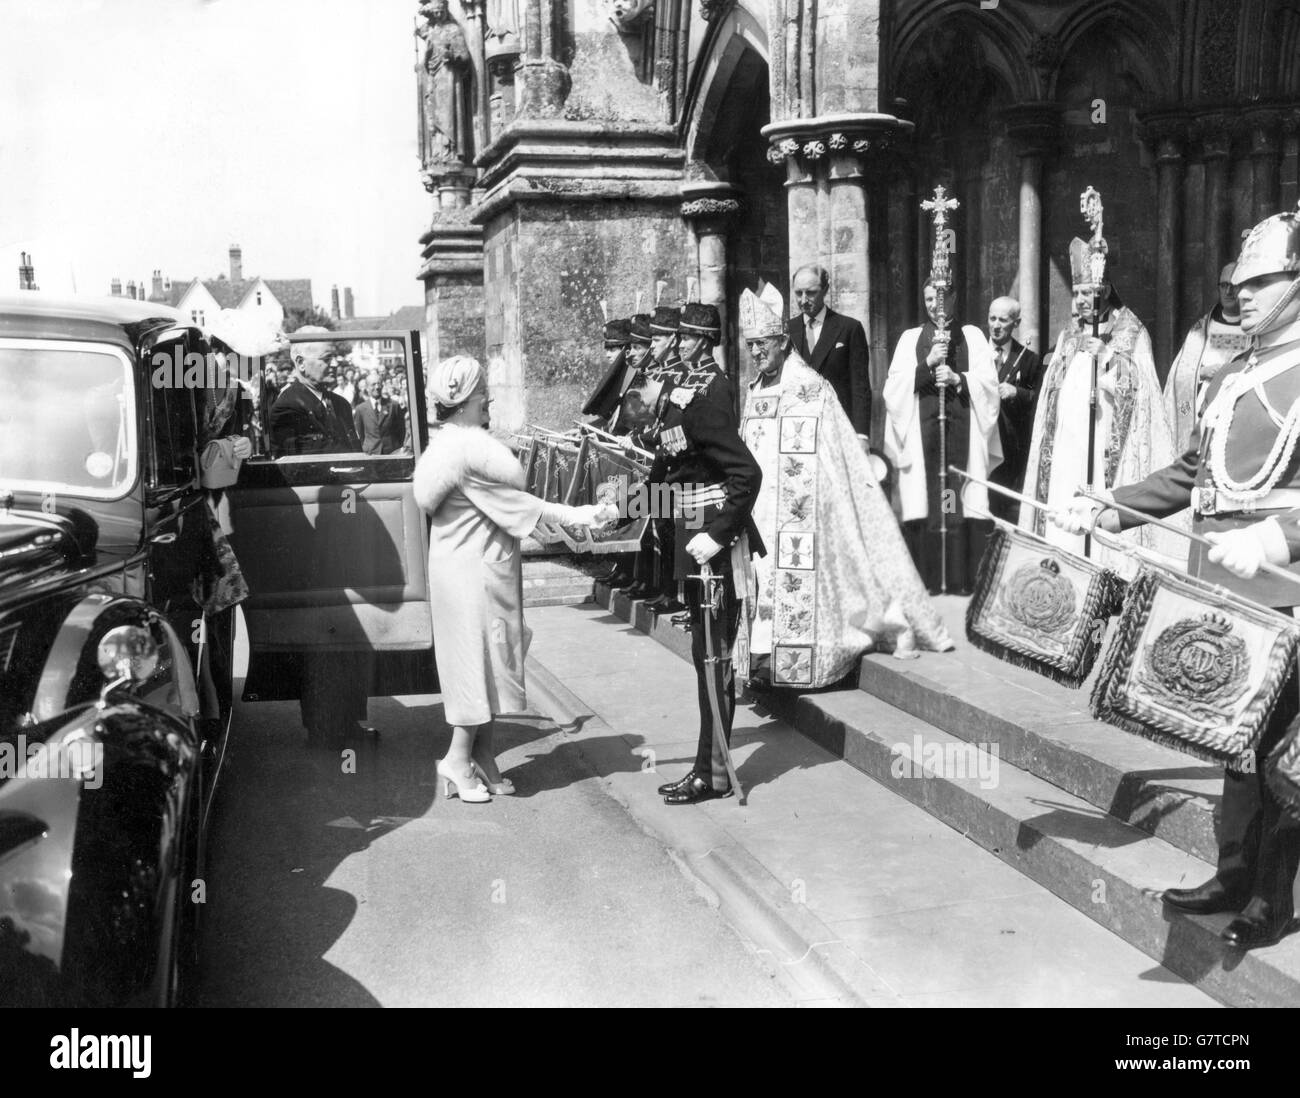 The Queen Mother is welcomed by Lord Herbert while the Archbishop of Canterbury, Dr. Geoffrey Fisher, waits to receive her on her arrival at Salisbury Cathedral to commemorate its 700th anniversary. About 3,000 people were present. The Queen Mother had driven from Cranborne, where she is staying with the Marquess and Marchioness of Salisbury. Stock Photo